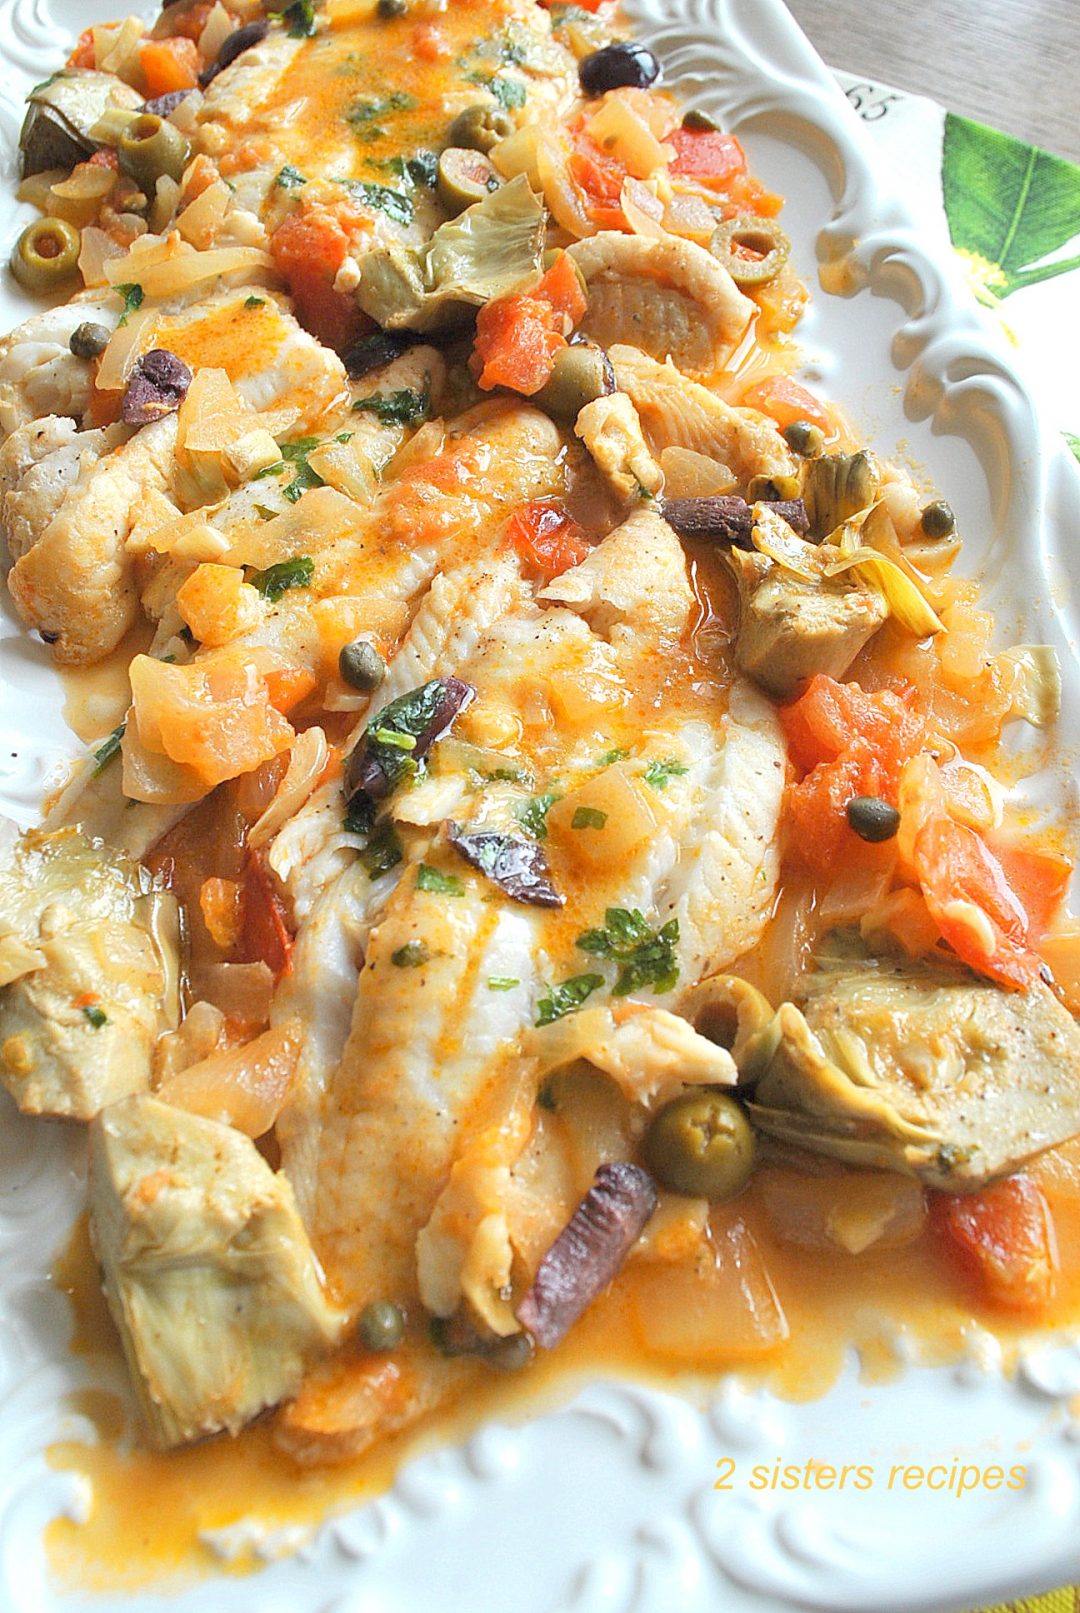 Dover Sole Livornese by 2sistersrecipes.com